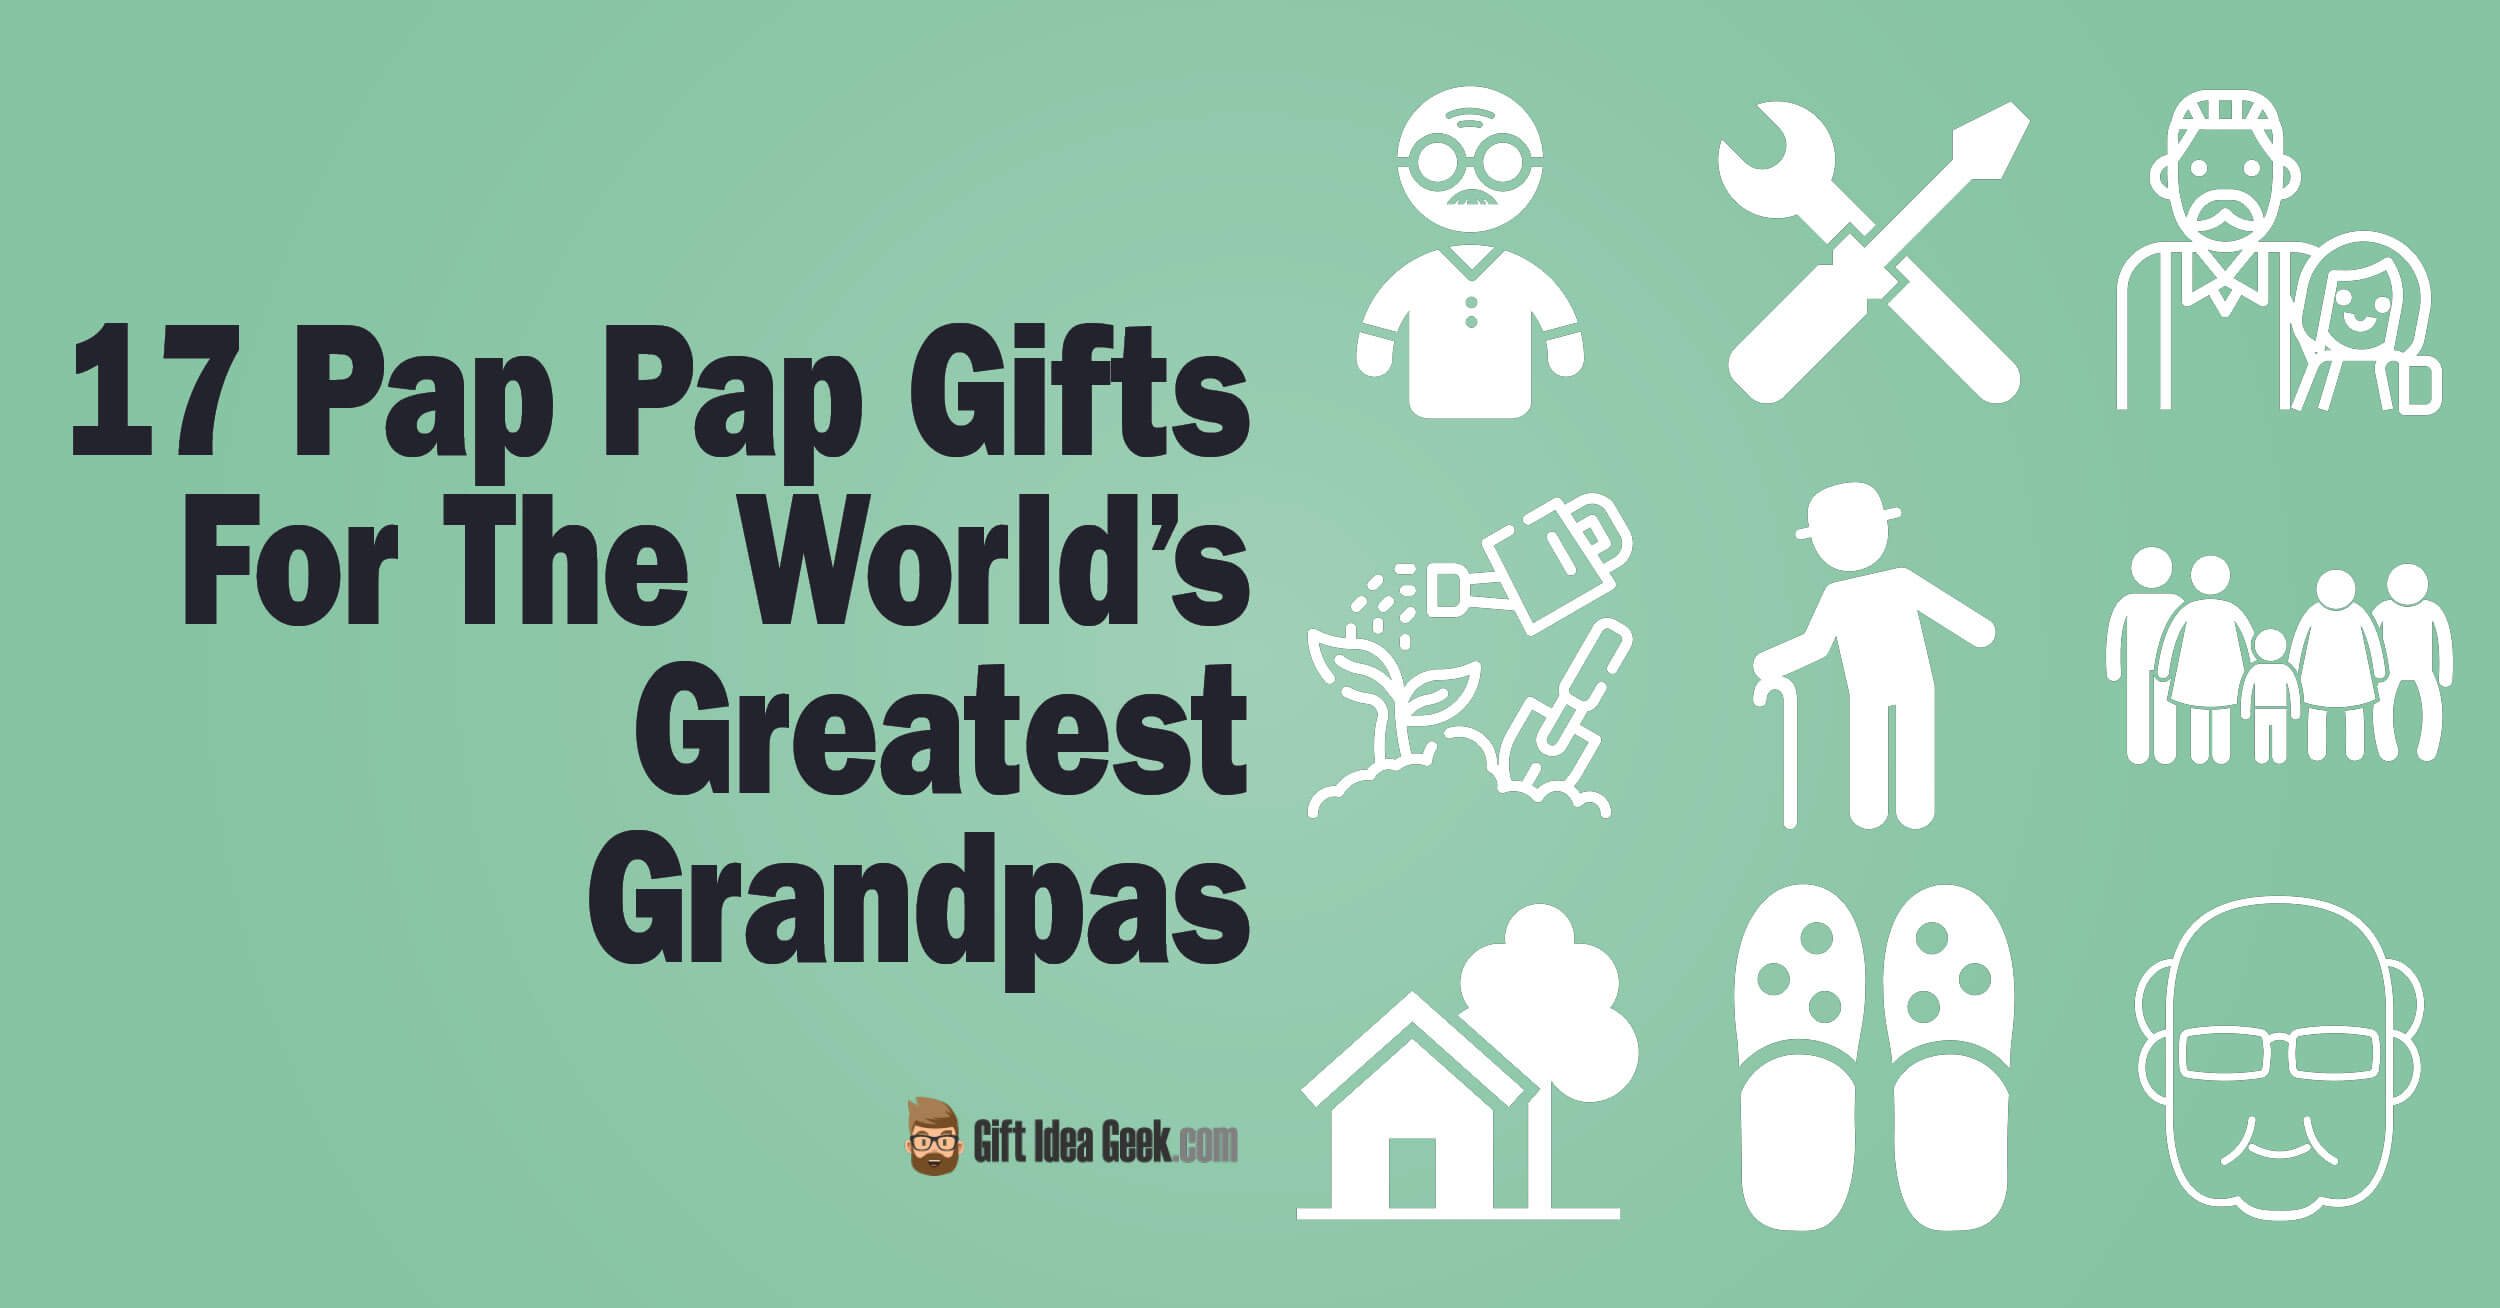 17 Pap Pap Gifts For The World’s Greatest Grandpas